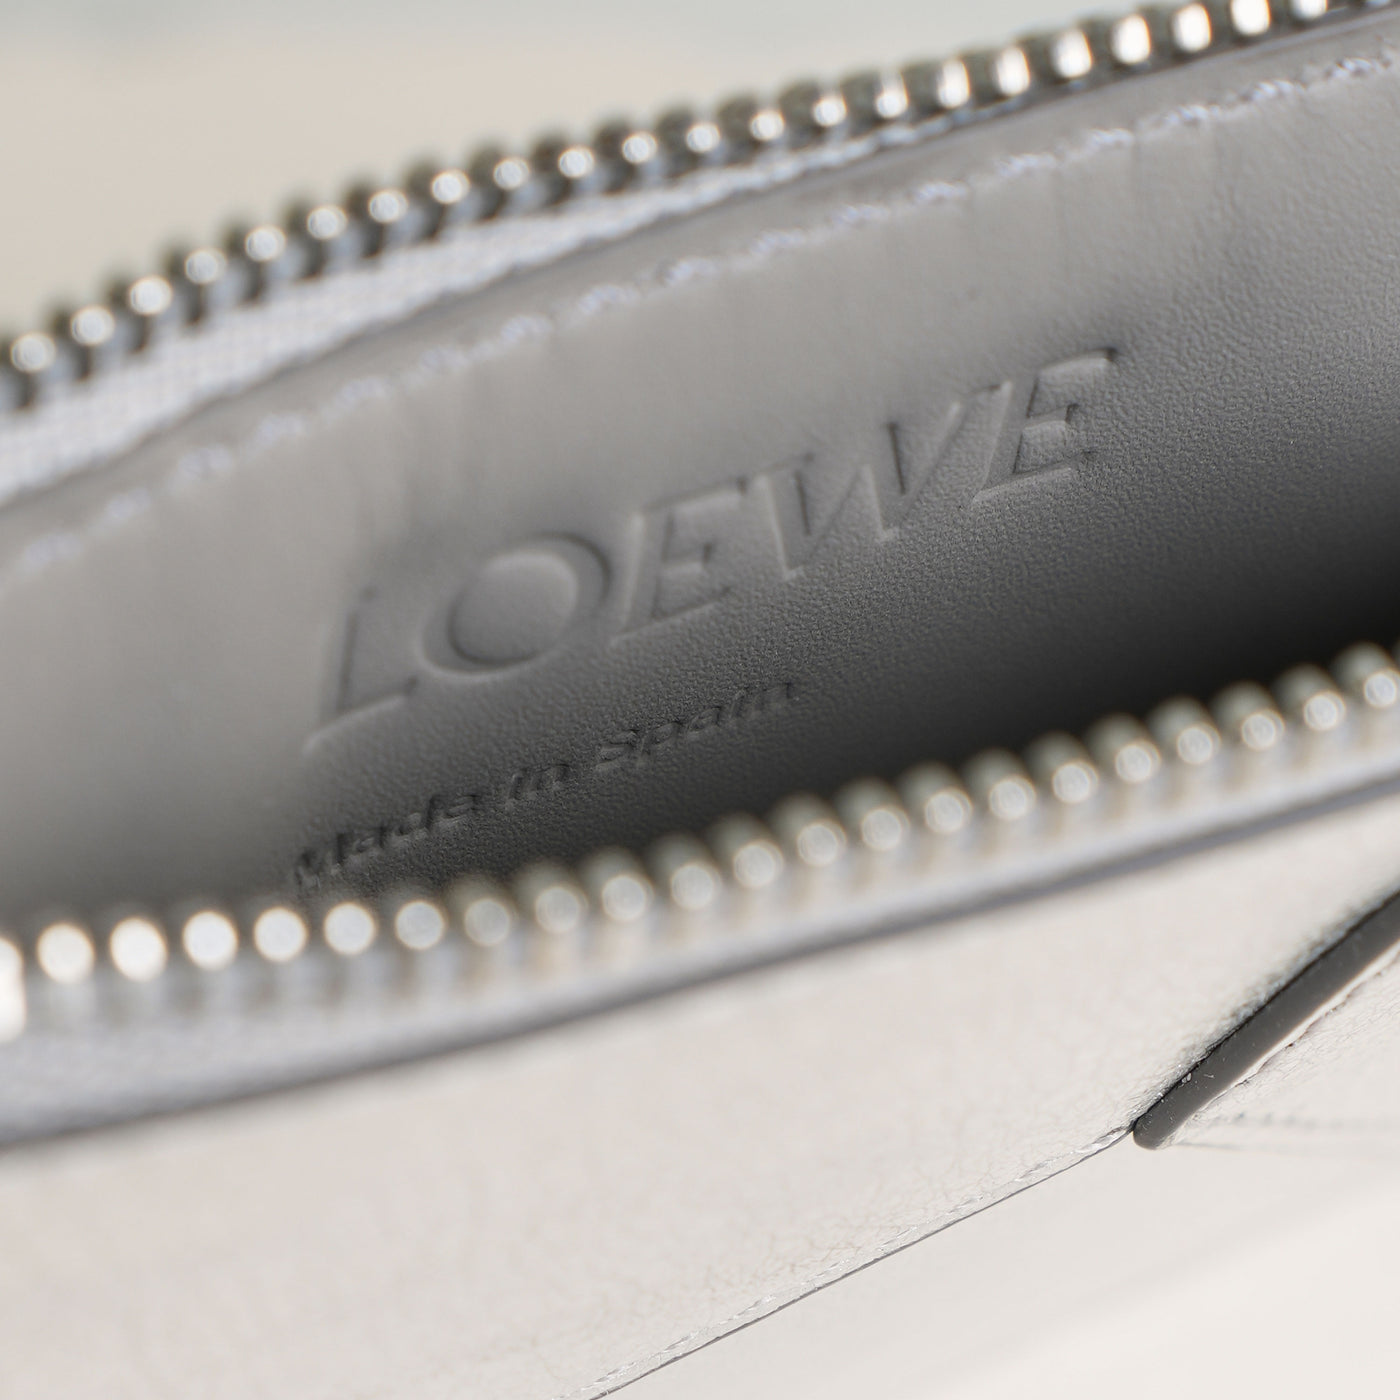 LOEWE silver puzzle coin leather cardholder with zipper